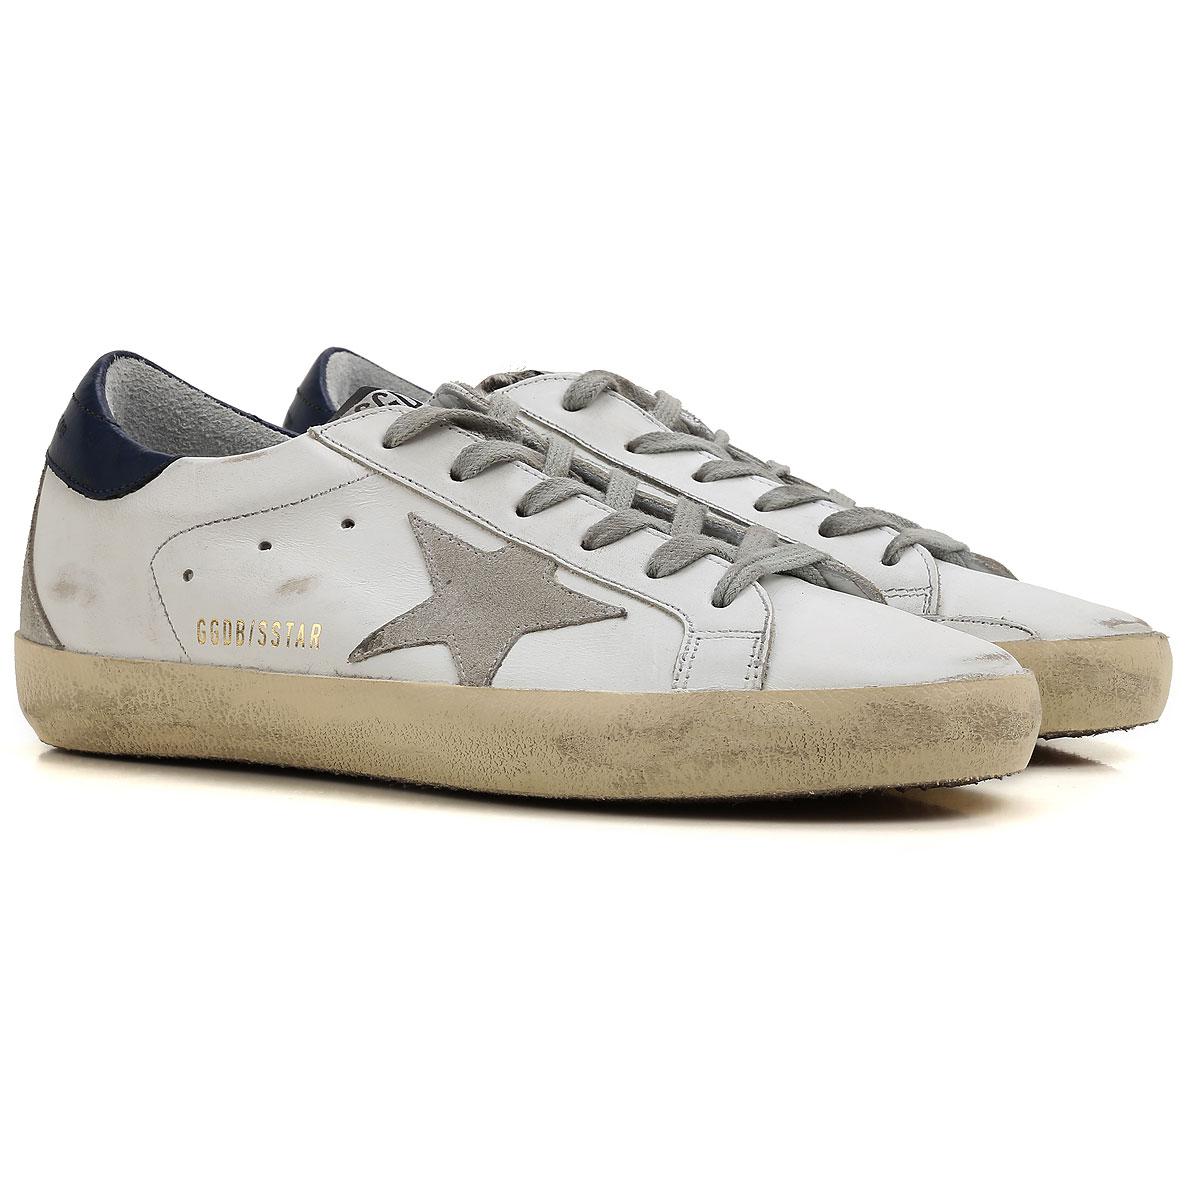 Golden Goose Deluxe Brand Goose Sneakers For Women On Sale in White - Lyst